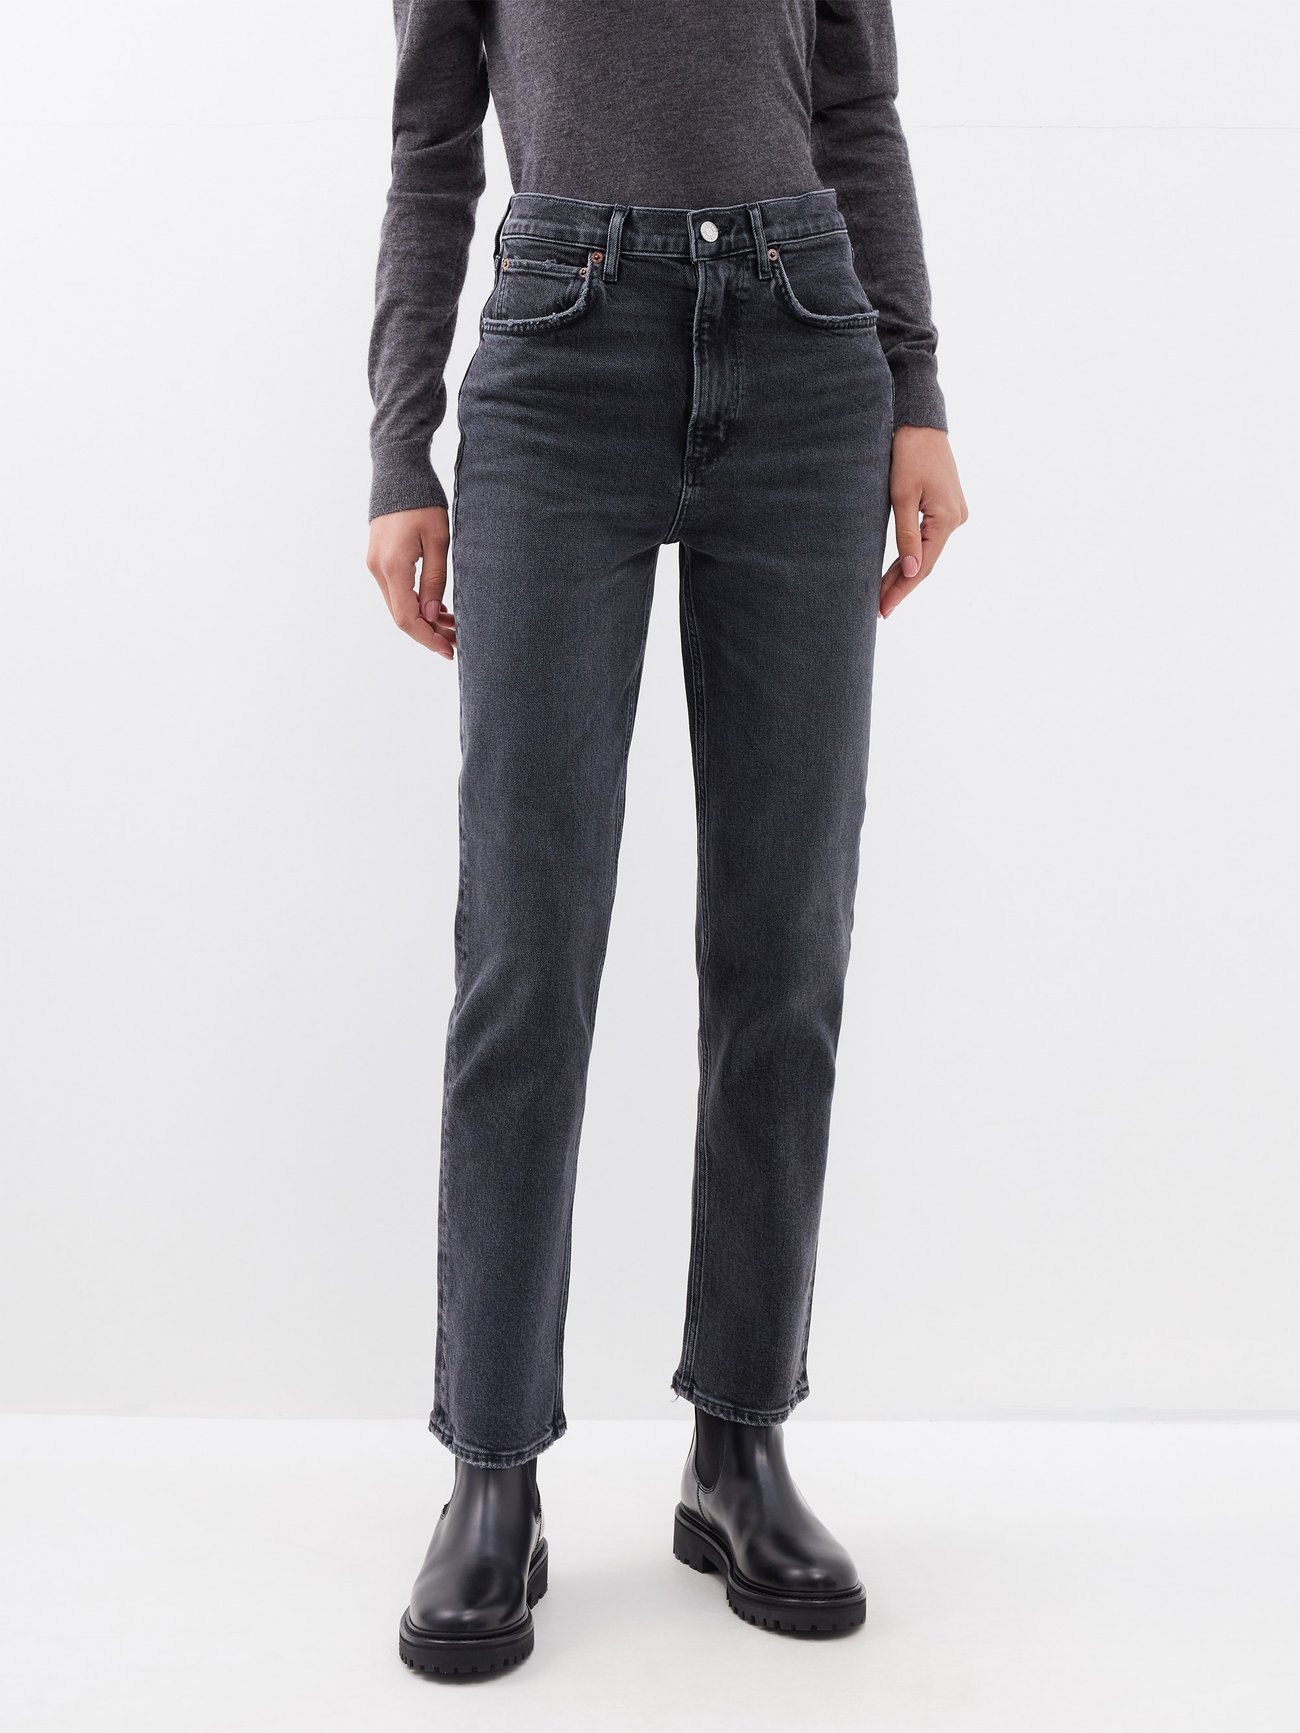 Black Stovepipe high-rise organic jeans | Agolde | MATCHES UK